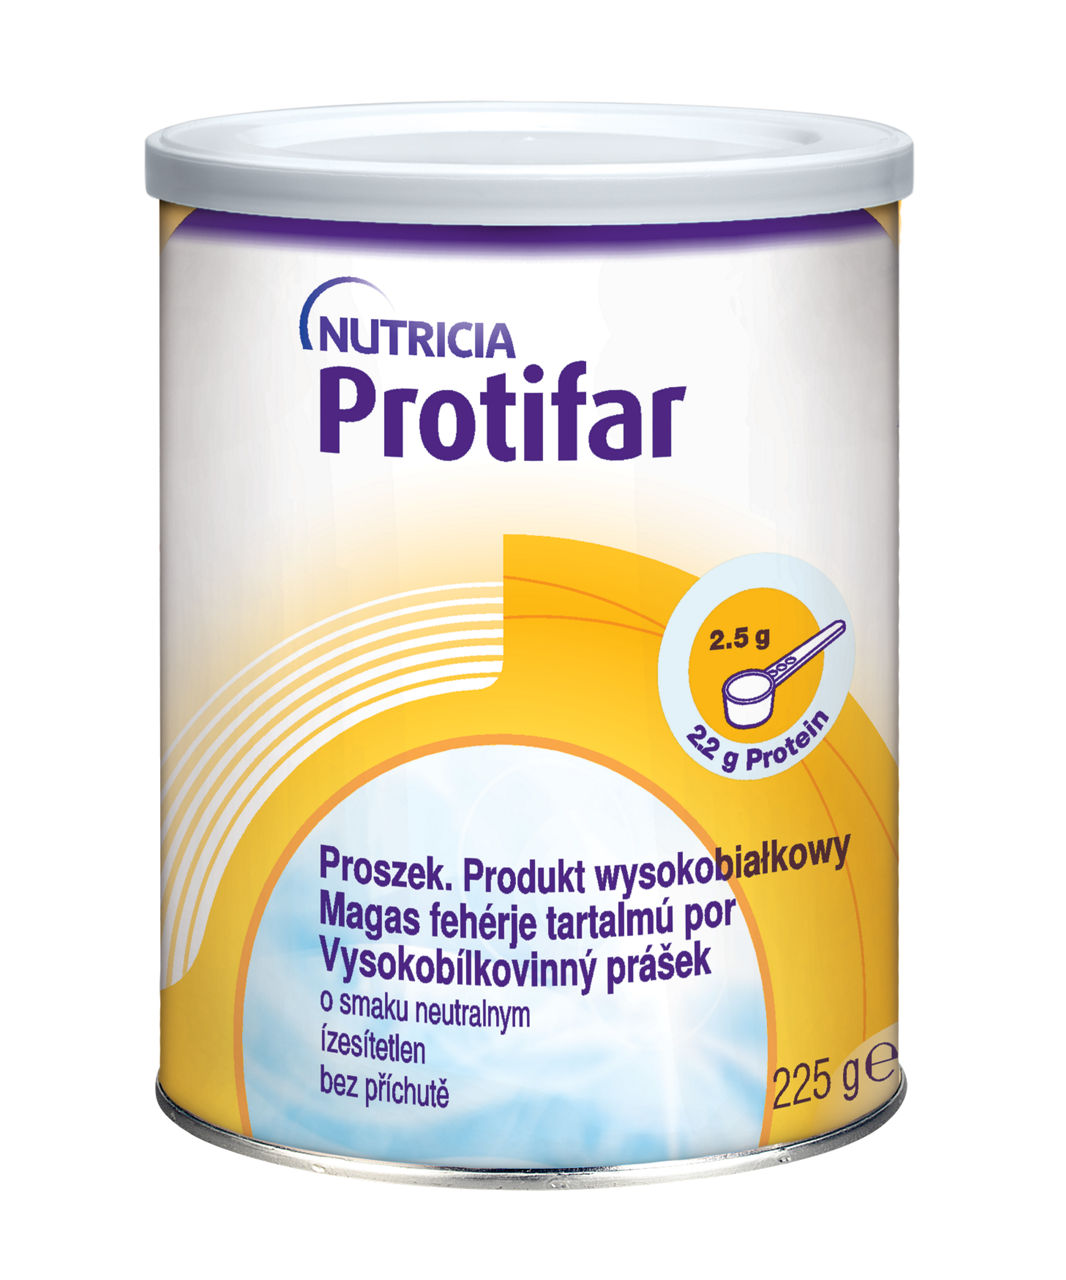 Nutricia Frailty & Disease Related Malnutrition Product Fortimel Compact  Energy